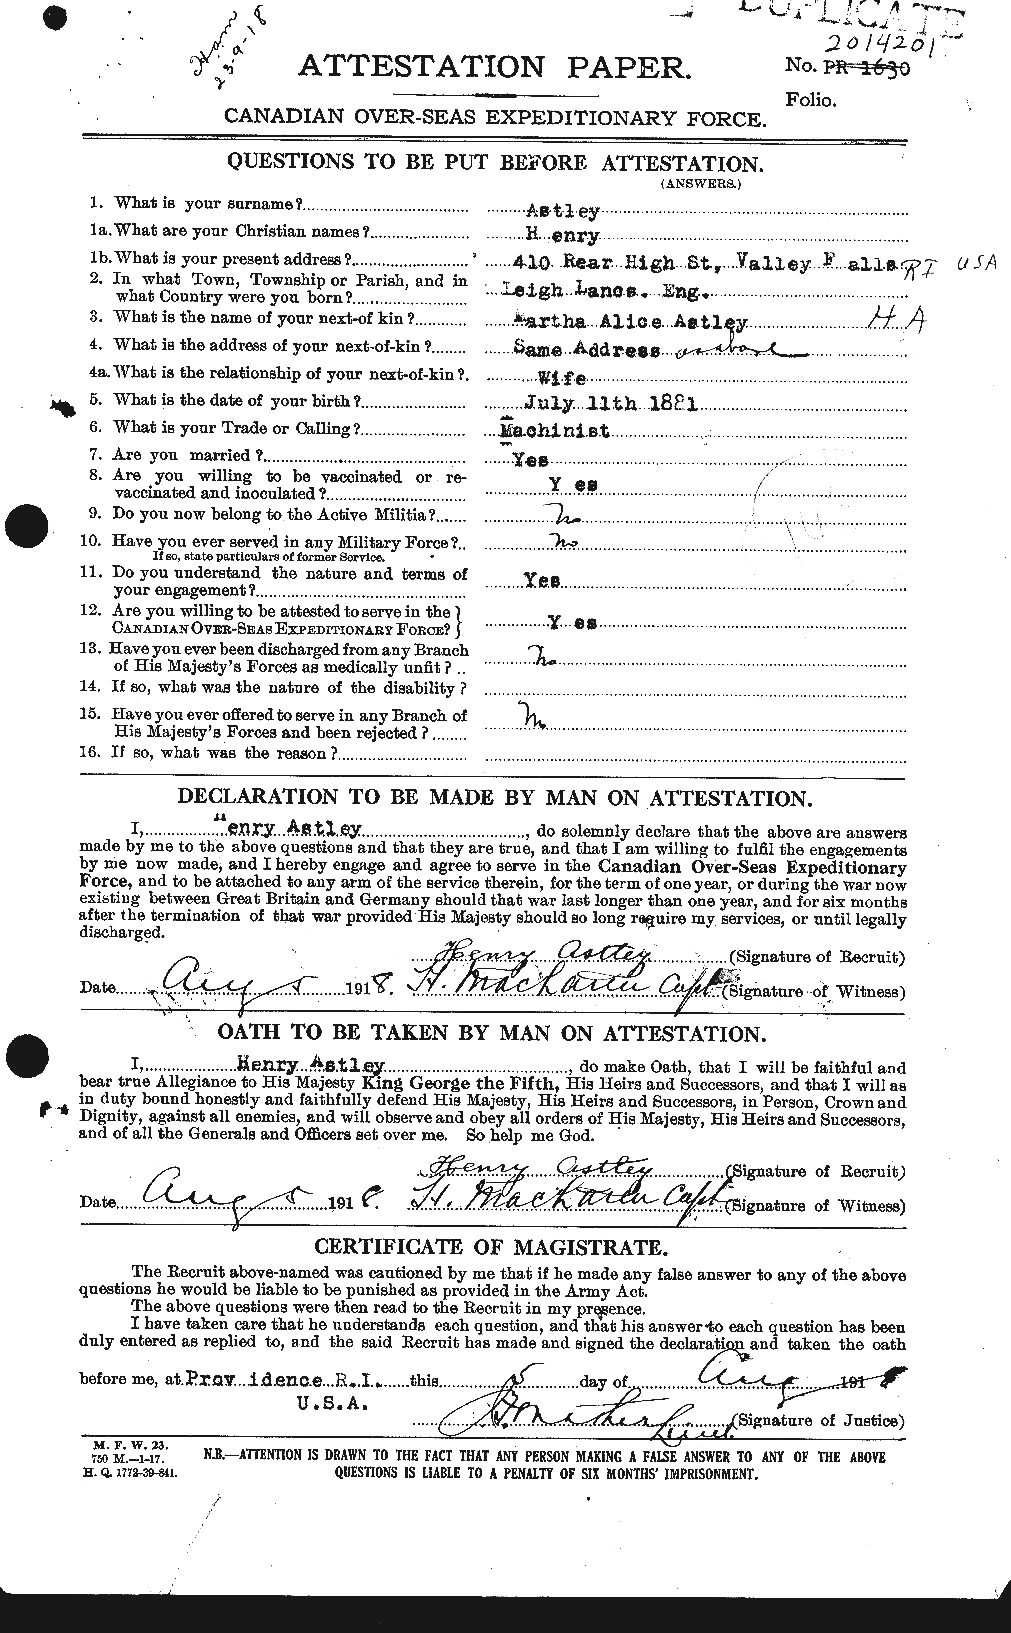 Personnel Records of the First World War - CEF 217118a